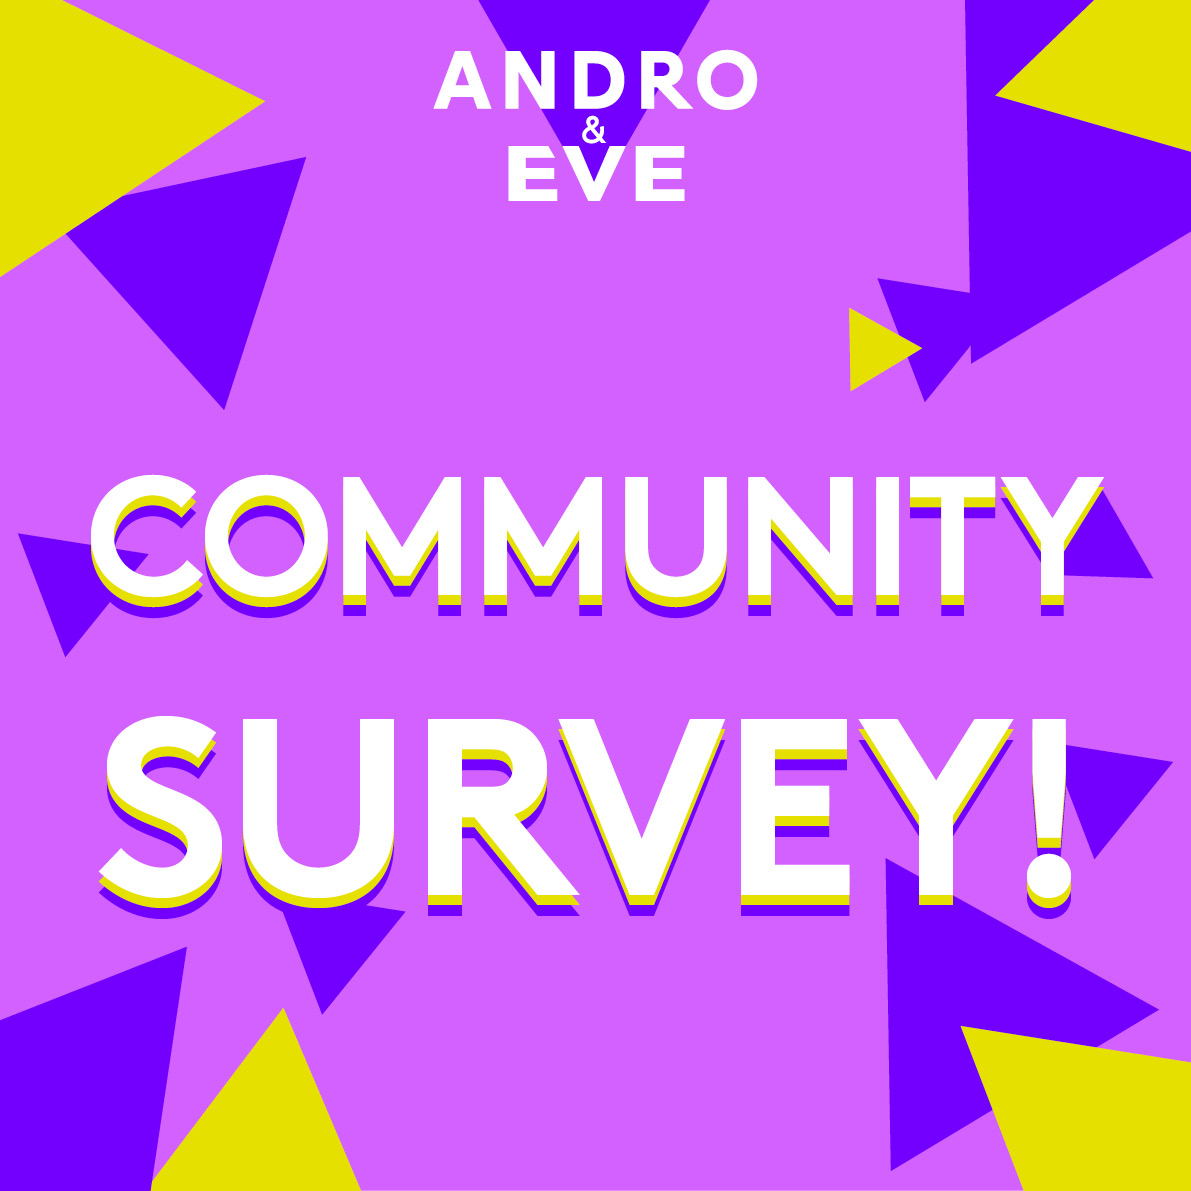 The words, community survey, are placed on the centre of a pink square tile. They are surrounded by triangle shapes in purple and yellow. The Andro and Eve logo sits at the top, whch features the words Andro and Eve in white, over a purple inverted triangle.